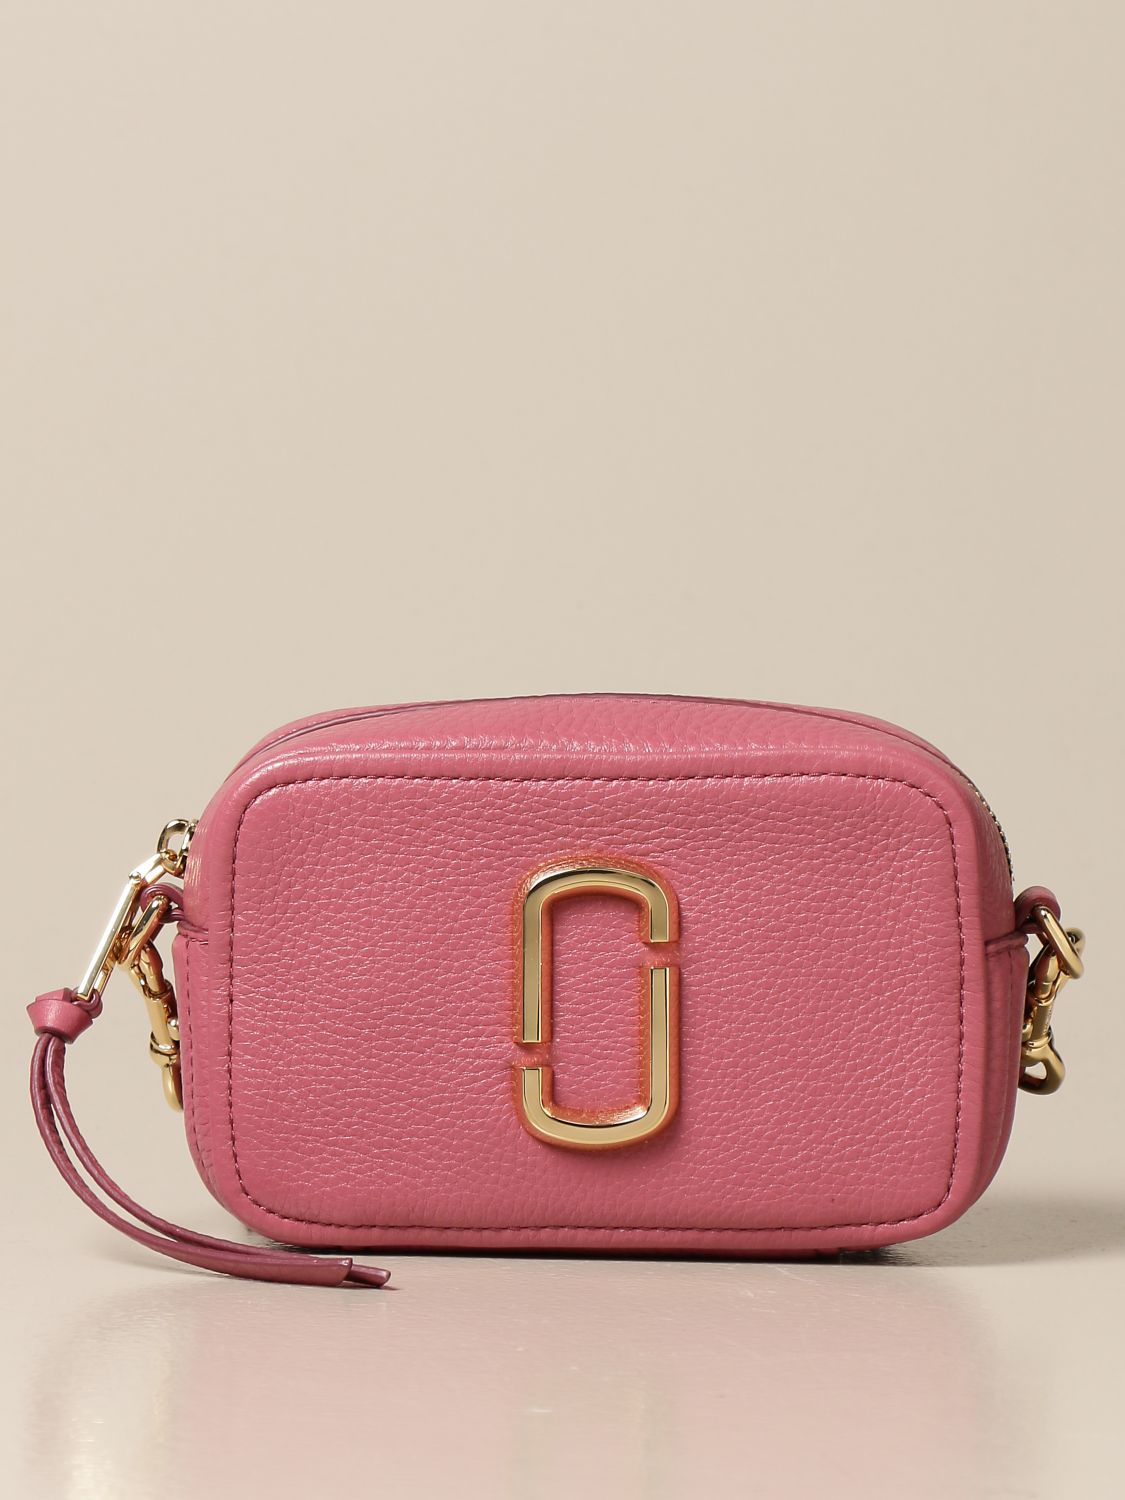 Marc Jacobs Outlet: The Softshot leather bag - Fuchsia  Marc Jacobs  crossbody bags M0016805 online at